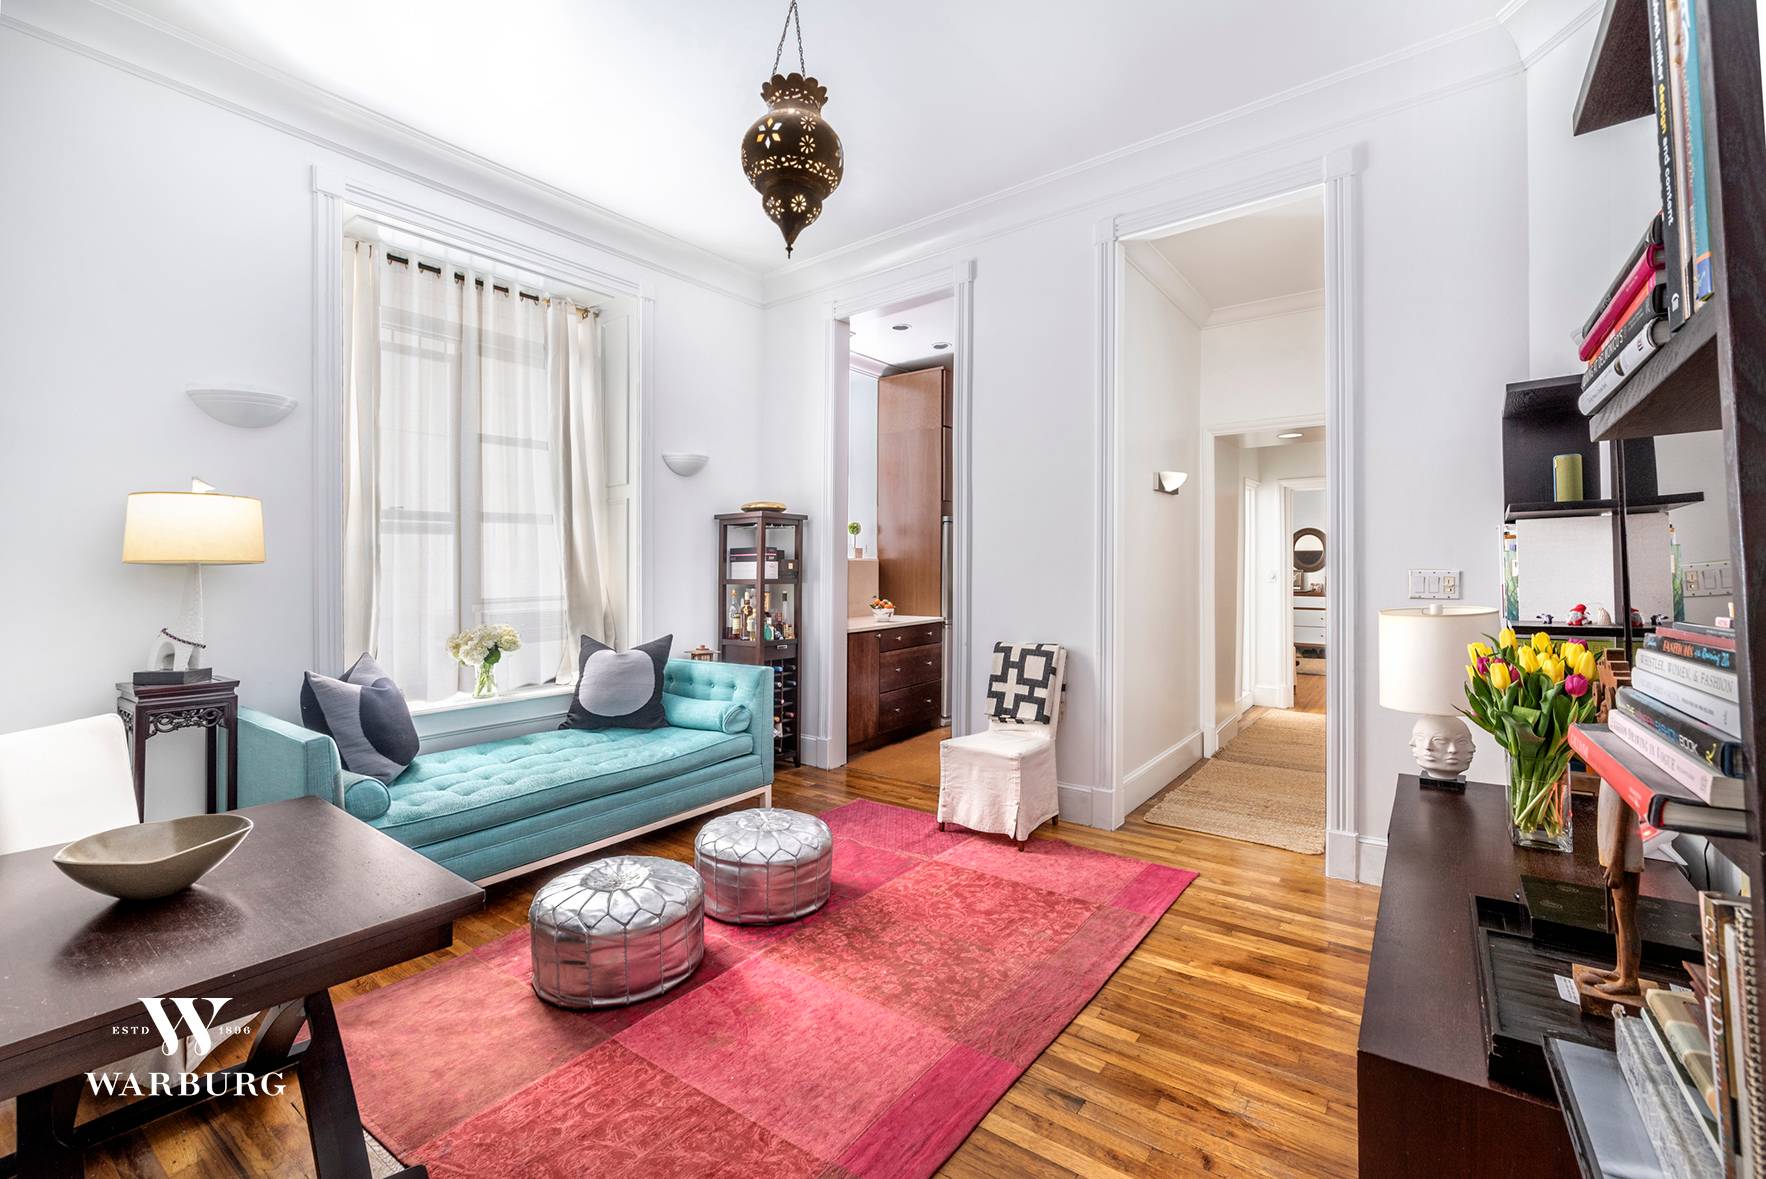 Lovely 1 bedroom, 1 bathroom in a boutique prewar co op directly across from the Museum of Natural History.